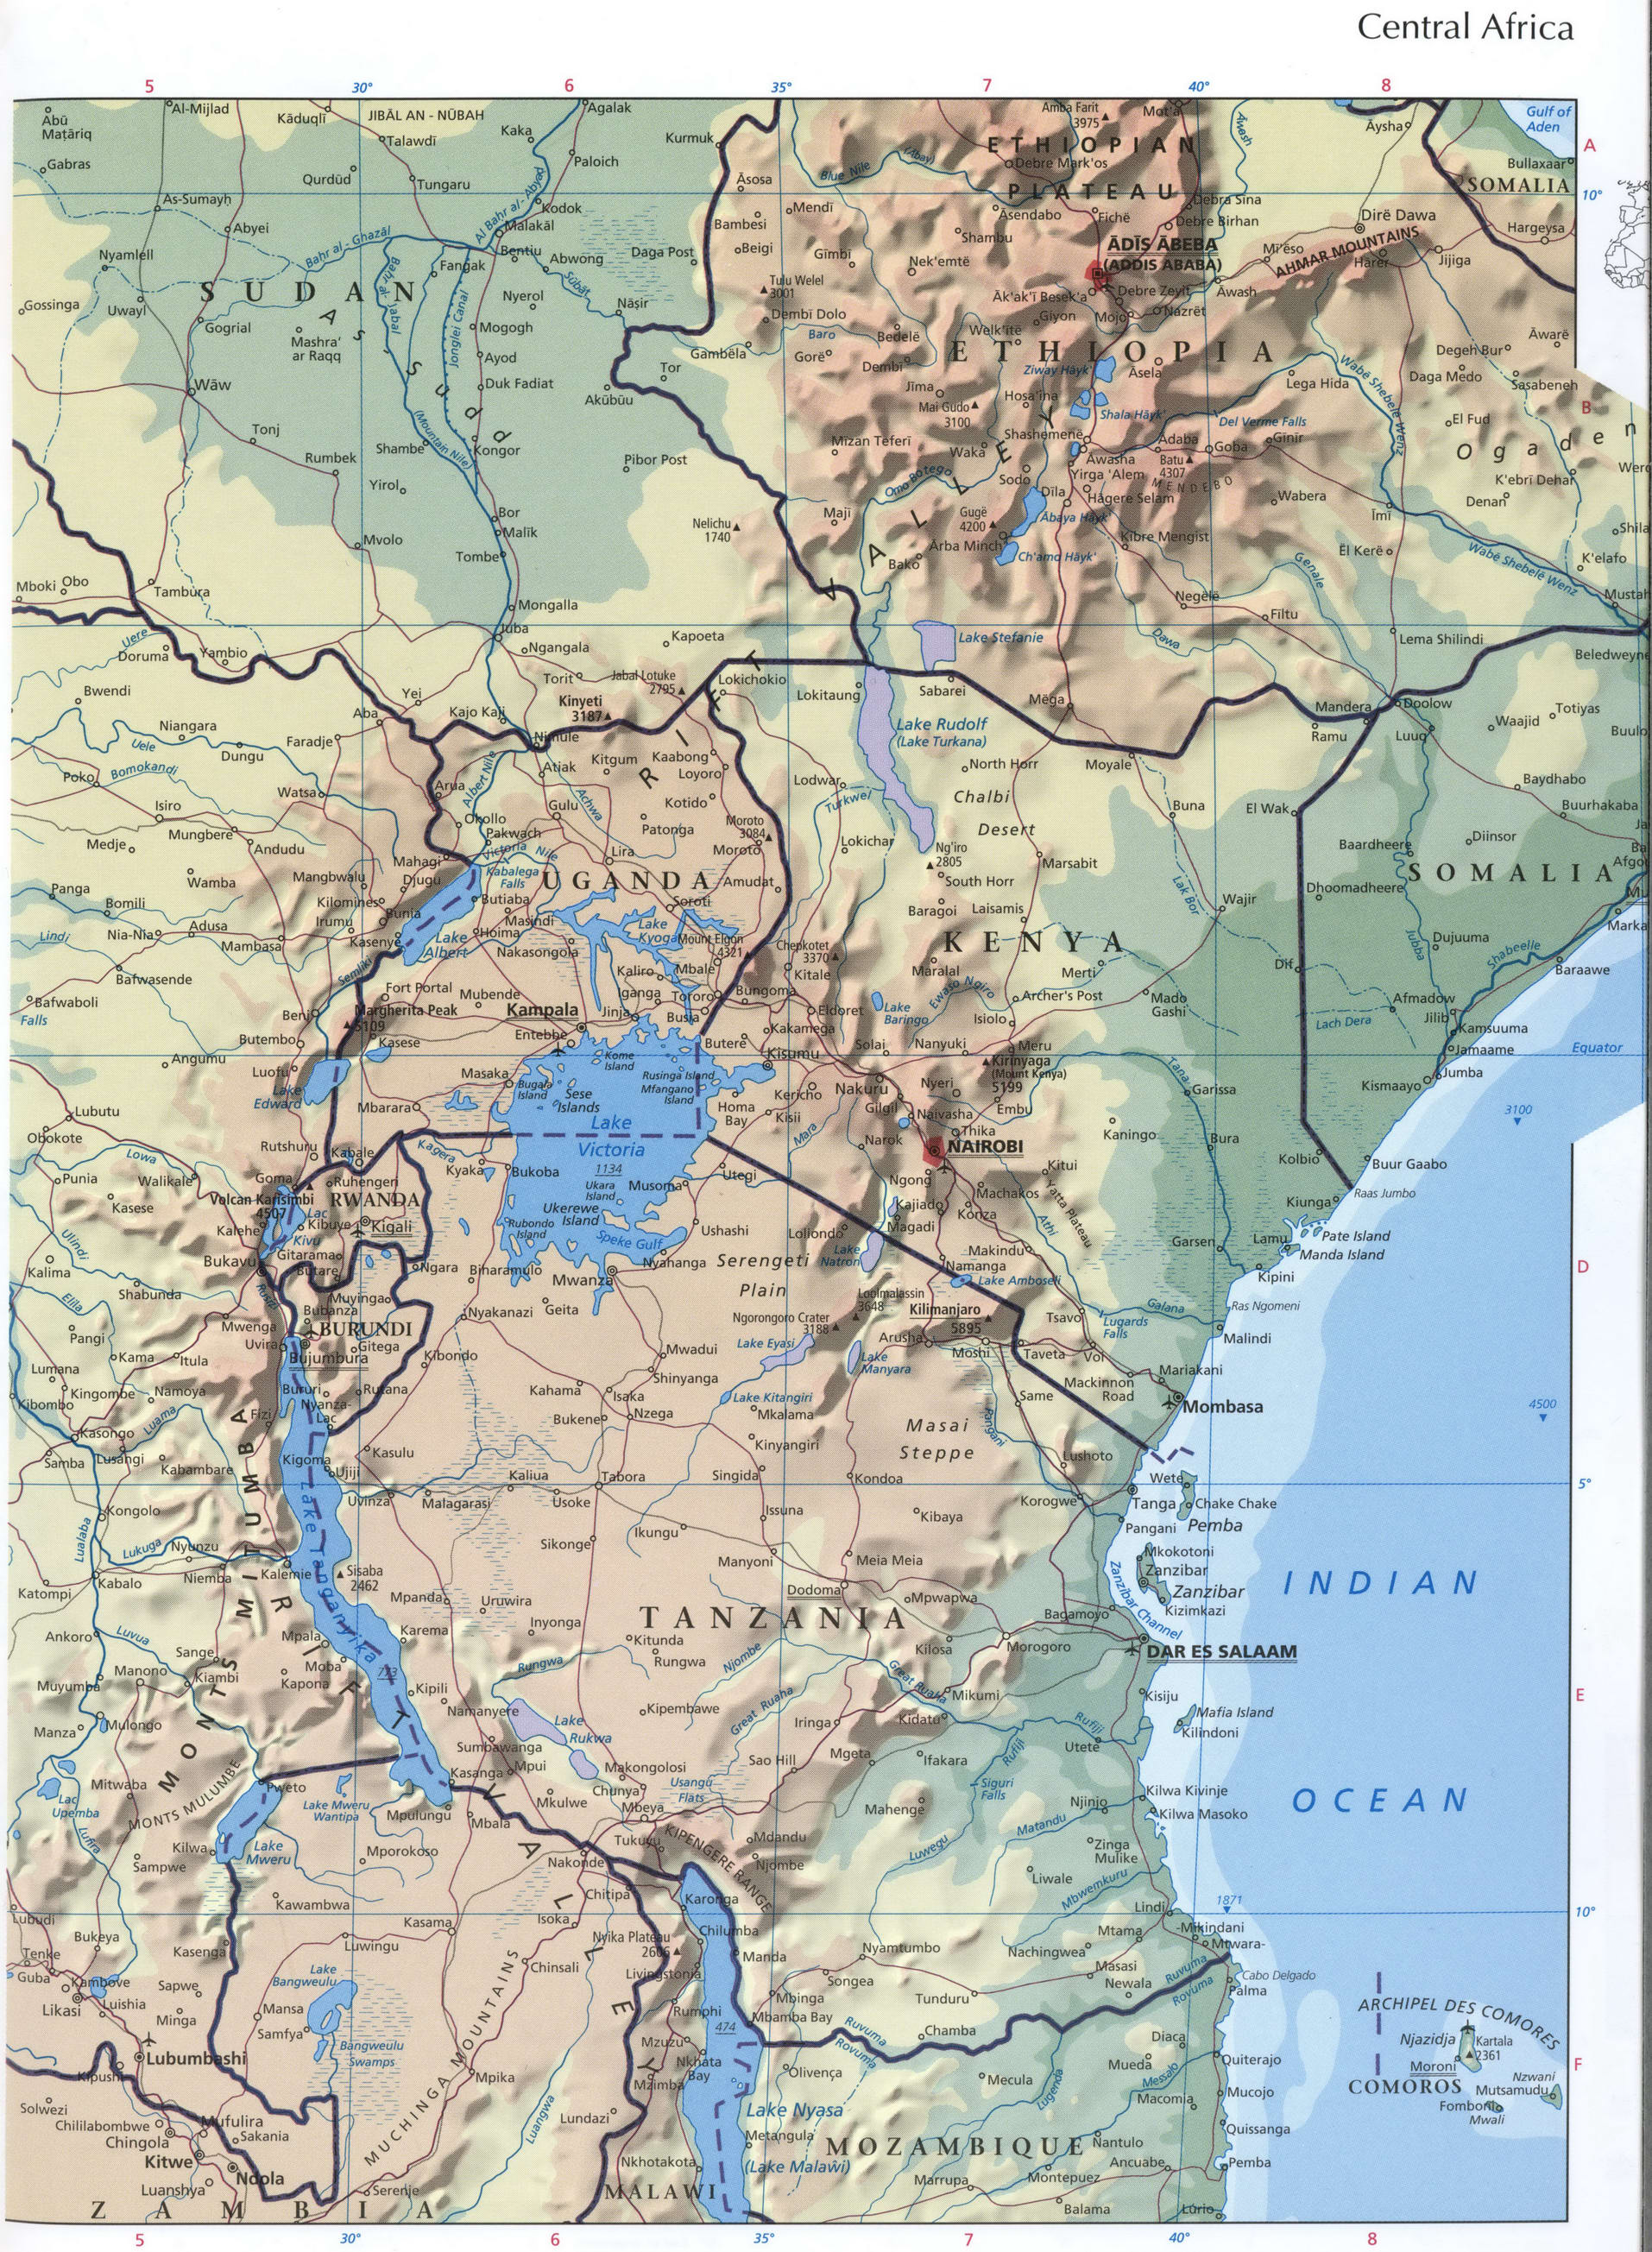 Central Africa map - east part